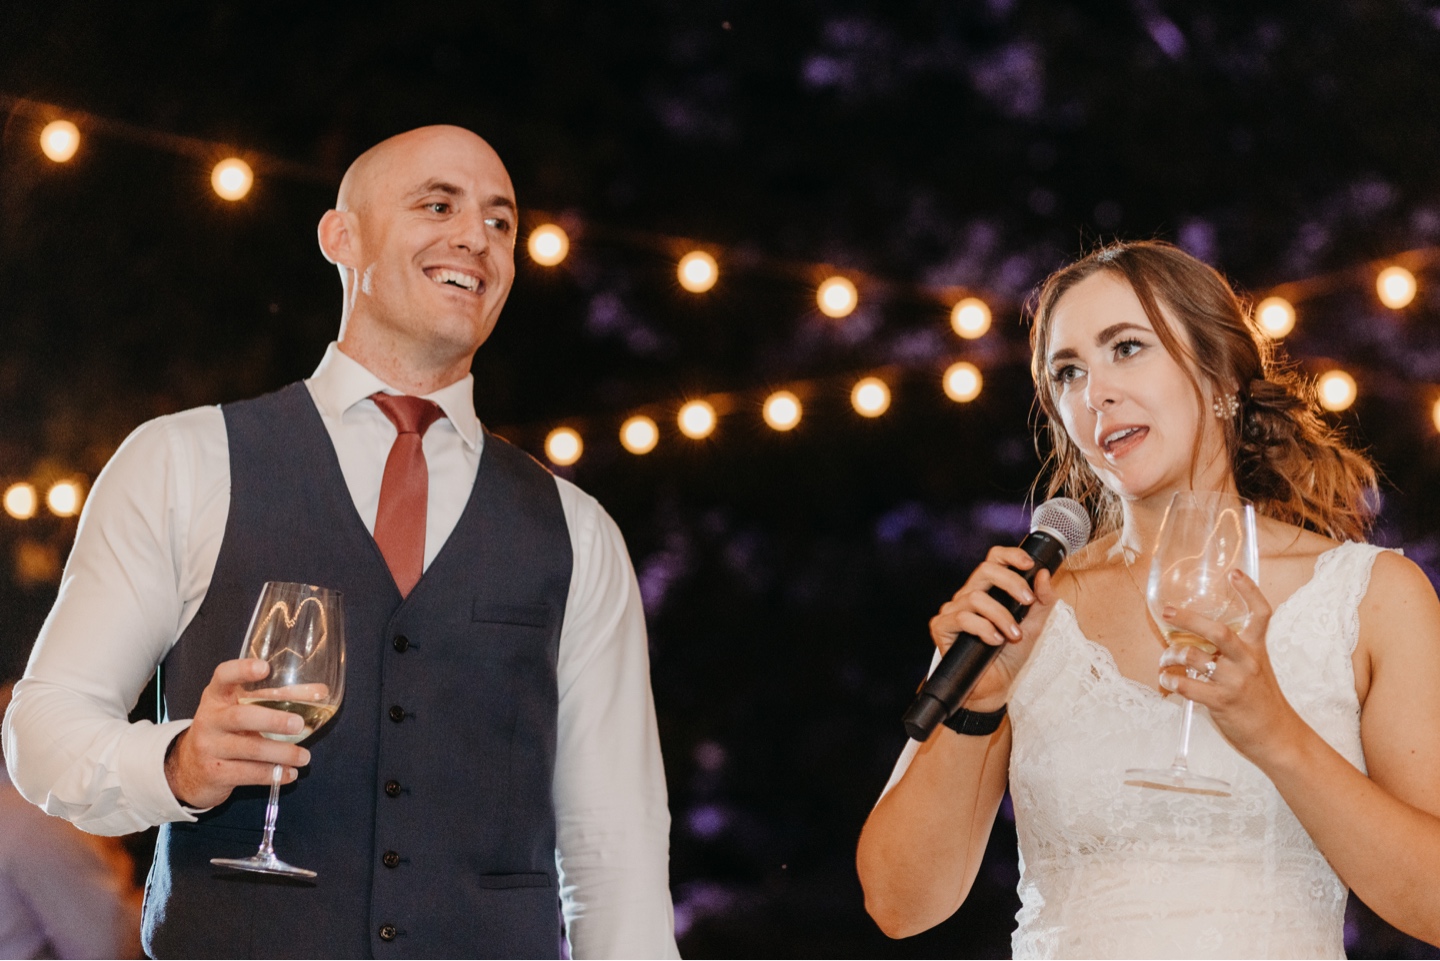 Bride gives a speech as her husband stands next to her. Wedding photography in Sacramento by Liz Koston.